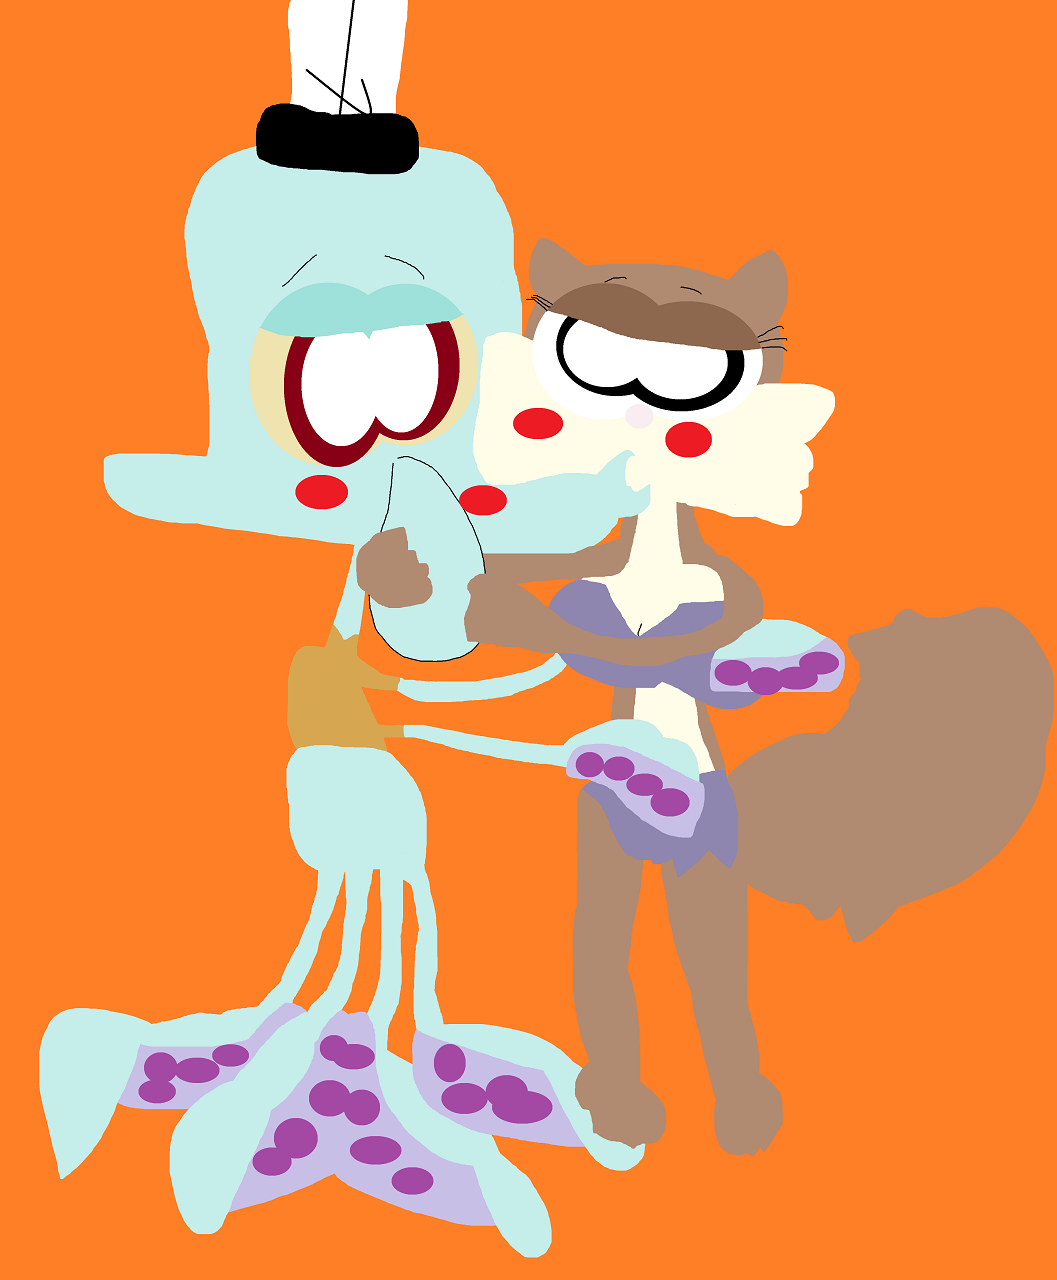 Just Squidward And Sandy Kissing Again by Falconlobo